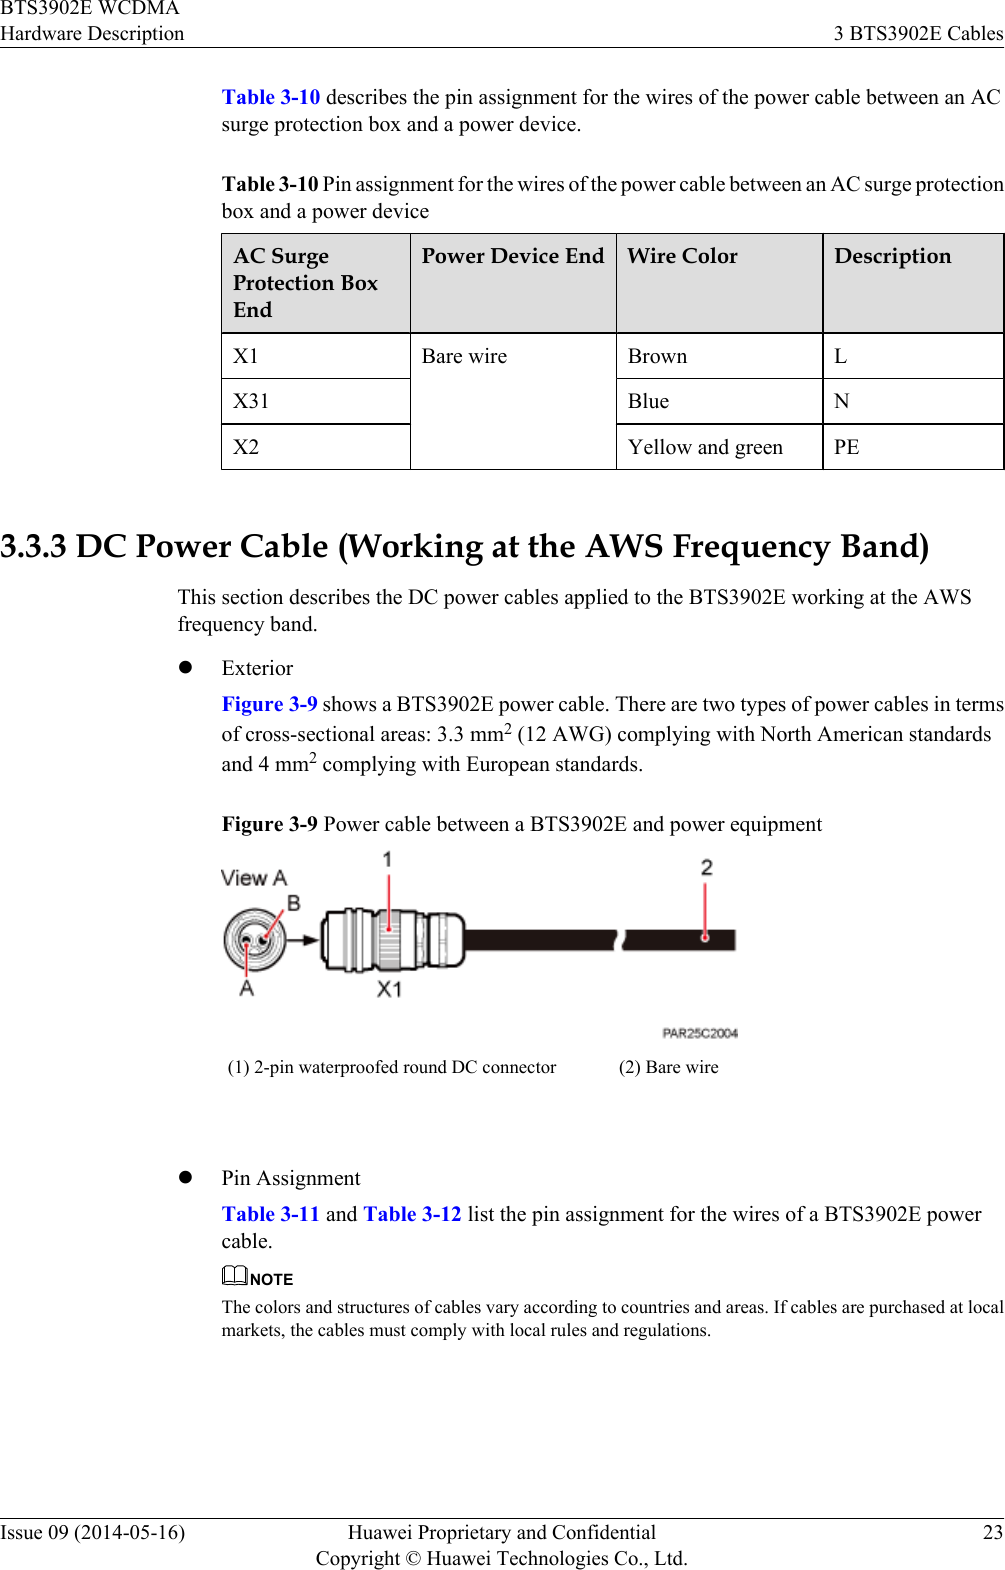 Table 3-10 describes the pin assignment for the wires of the power cable between an ACsurge protection box and a power device.Table 3-10 Pin assignment for the wires of the power cable between an AC surge protectionbox and a power deviceAC SurgeProtection BoxEndPower Device End Wire Color DescriptionX1 Bare wire Brown LX31 Blue NX2 Yellow and green PE 3.3.3 DC Power Cable (Working at the AWS Frequency Band)This section describes the DC power cables applied to the BTS3902E working at the AWSfrequency band.lExteriorFigure 3-9 shows a BTS3902E power cable. There are two types of power cables in termsof cross-sectional areas: 3.3 mm2 (12 AWG) complying with North American standardsand 4 mm2 complying with European standards.Figure 3-9 Power cable between a BTS3902E and power equipment(1) 2-pin waterproofed round DC connector (2) Bare wire lPin AssignmentTable 3-11 and Table 3-12 list the pin assignment for the wires of a BTS3902E powercable.NOTEThe colors and structures of cables vary according to countries and areas. If cables are purchased at localmarkets, the cables must comply with local rules and regulations.BTS3902E WCDMAHardware Description 3 BTS3902E CablesIssue 09 (2014-05-16) Huawei Proprietary and ConfidentialCopyright © Huawei Technologies Co., Ltd.23